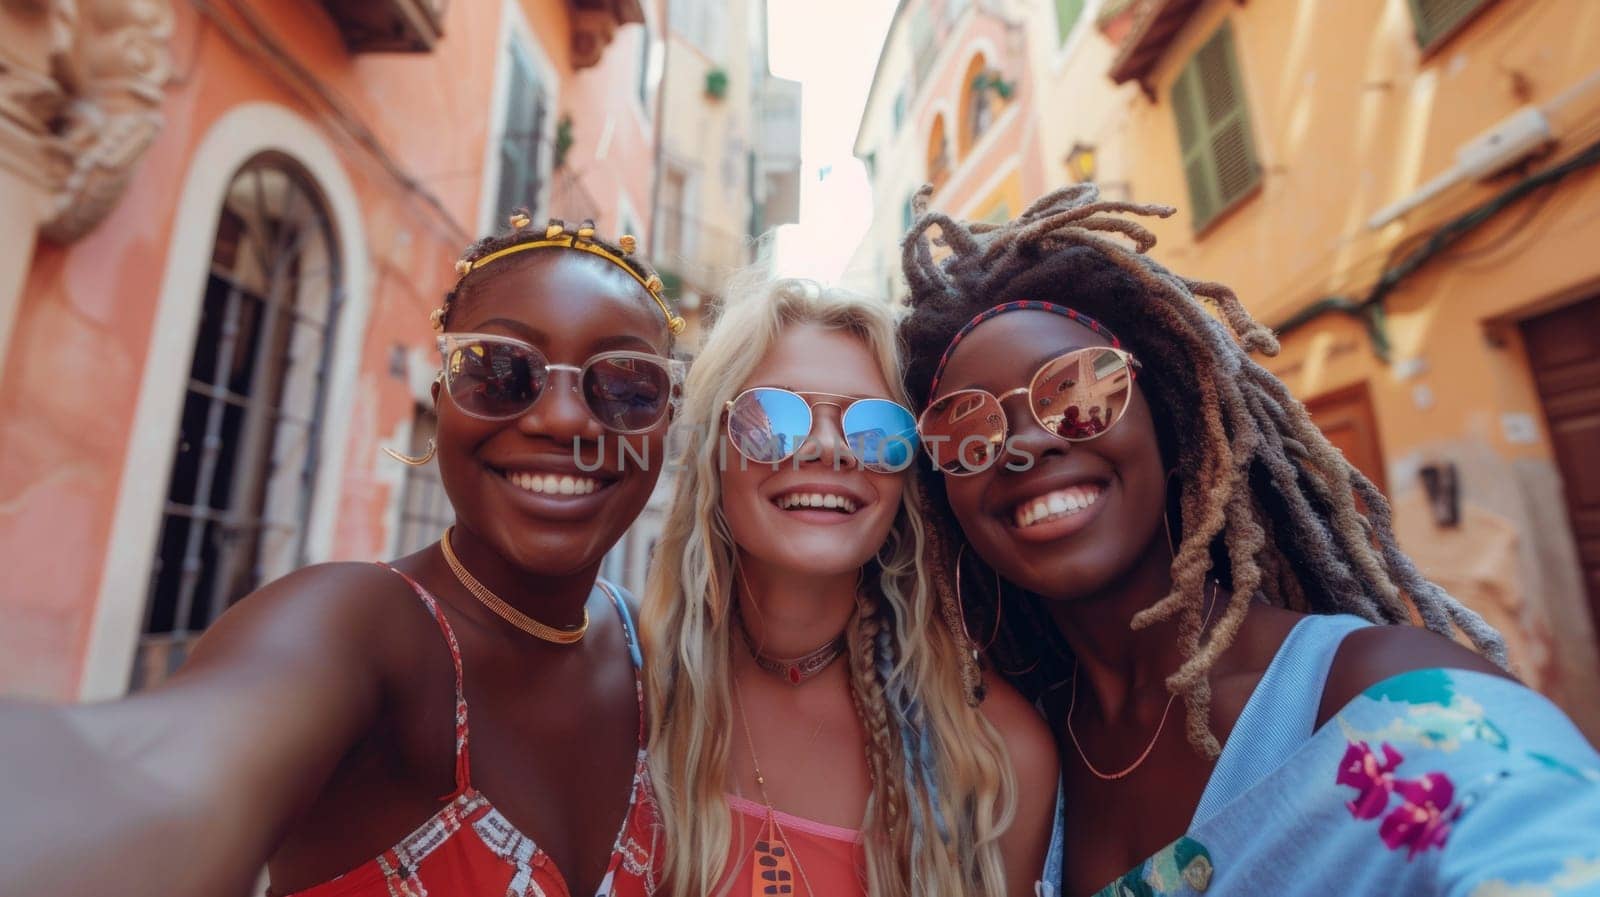 Three women are taking a selfie together in the street